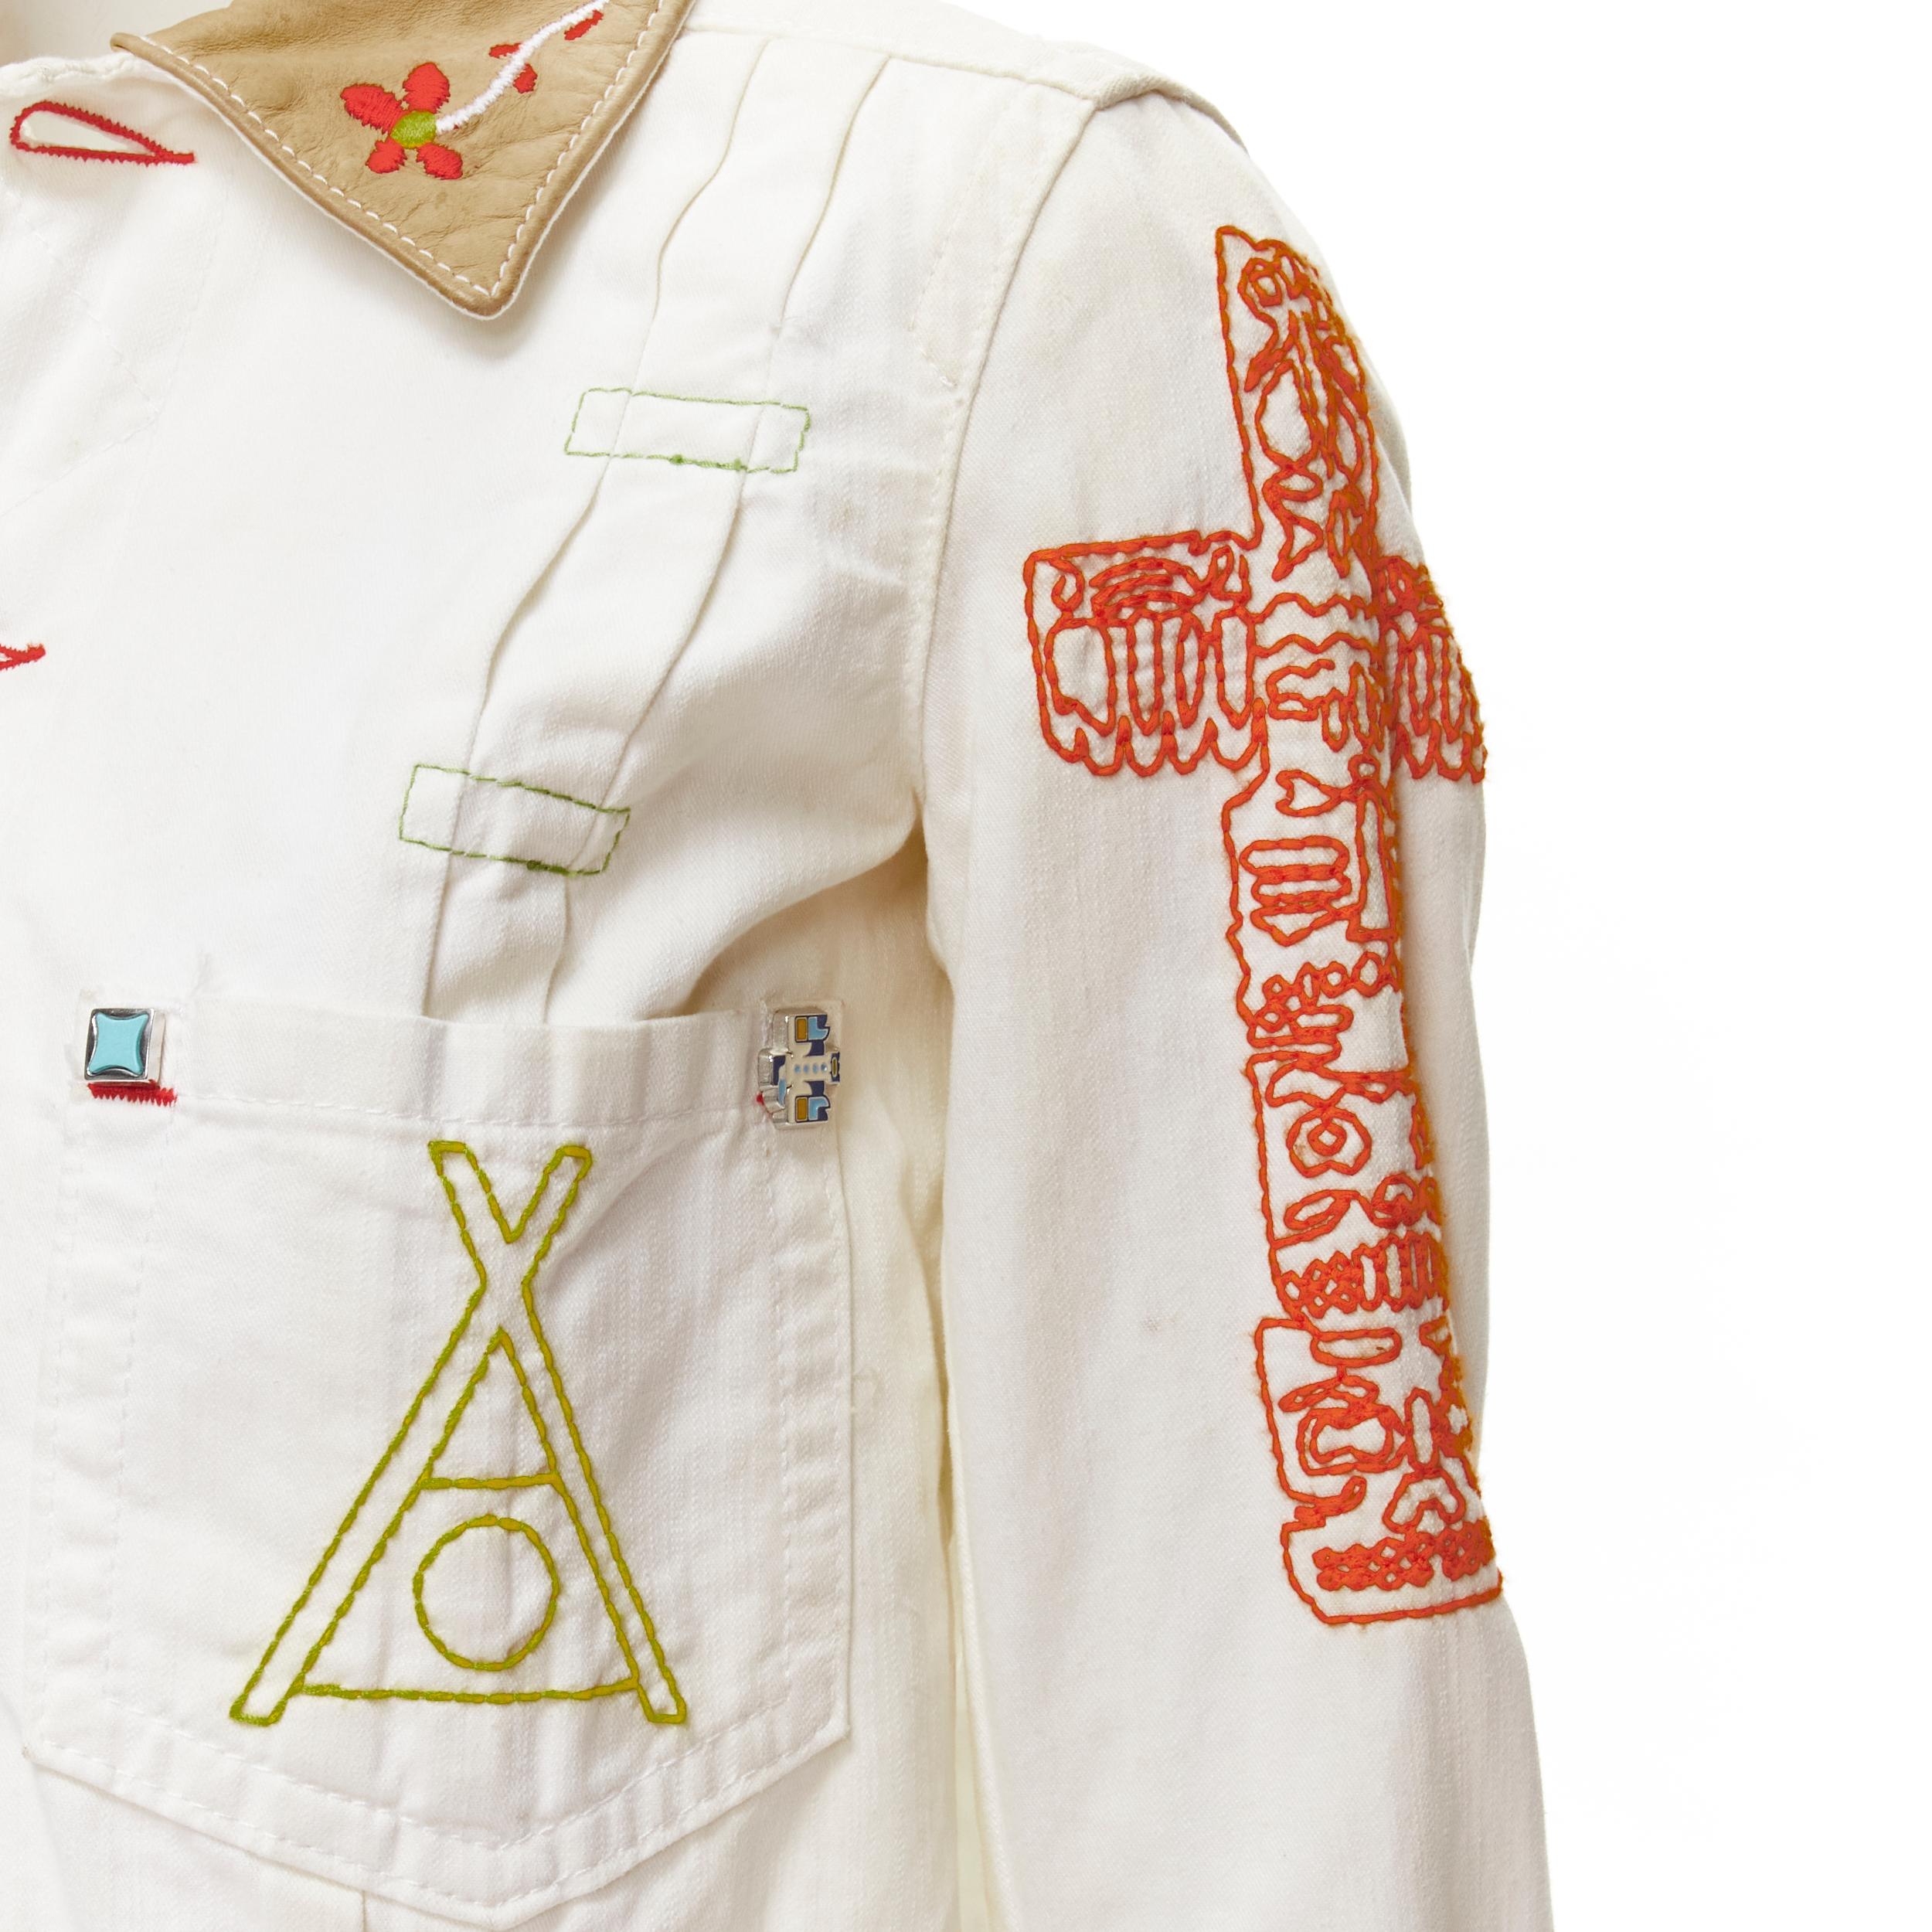 DSQUARED2 Vintage white tent embroidery leather collar denim jacket IT38 XS
Brand: Dsquared2
Material: Denim
Color: White
Pattern: Solid
Closure: Button
Extra Detail: Leather collar with embroidery and brand leather patch at back. Pleat for flared